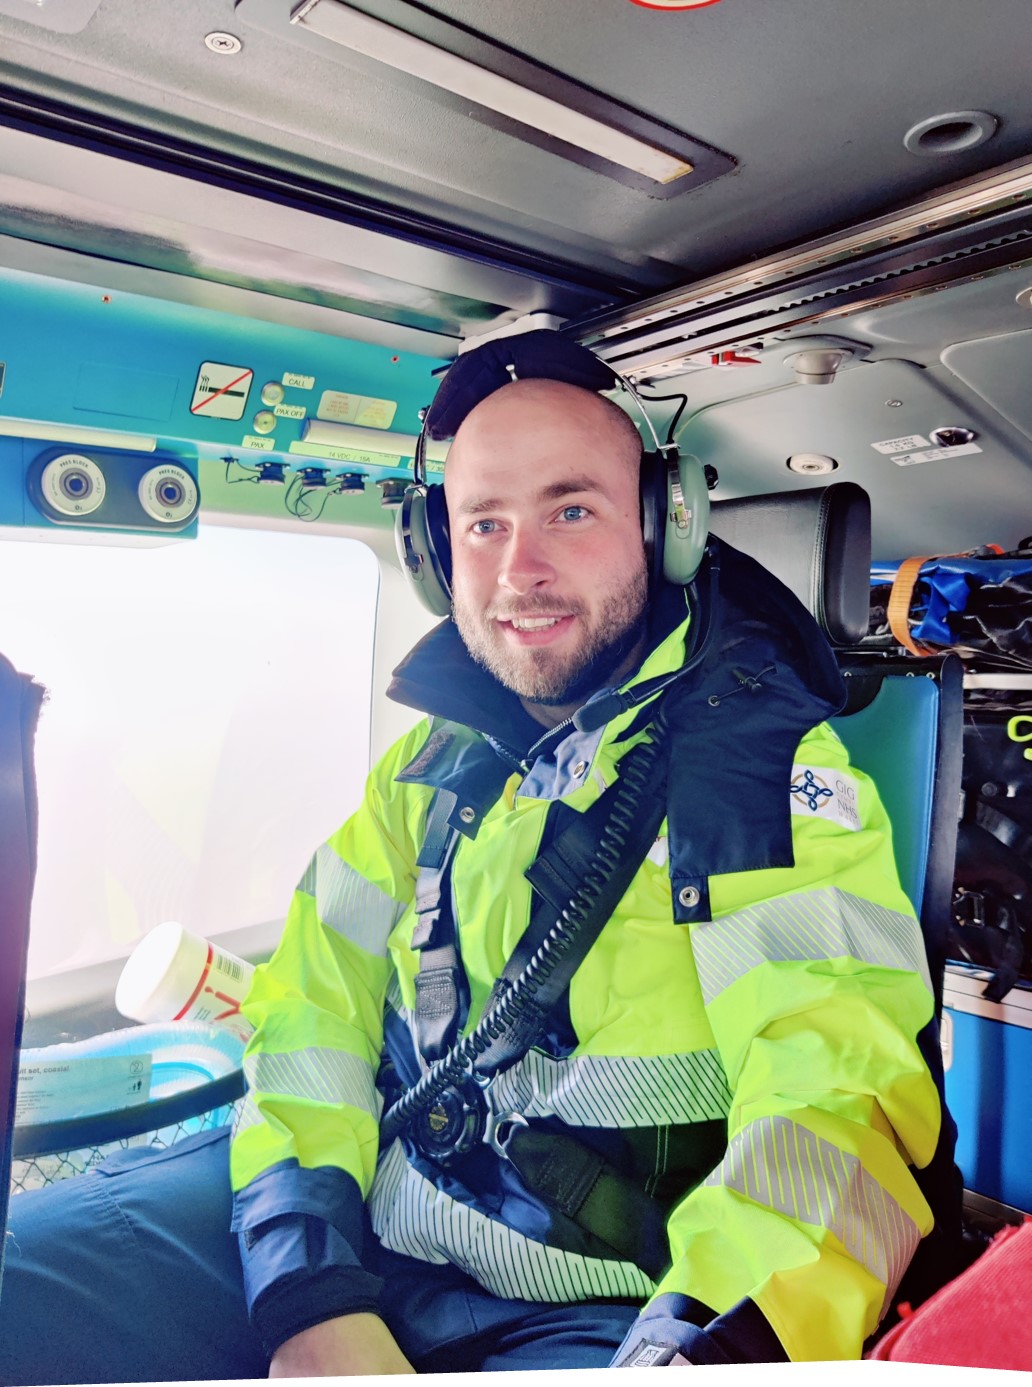 Image shows RAF medic wearing headset and high visibility jacket inside an ambulance.